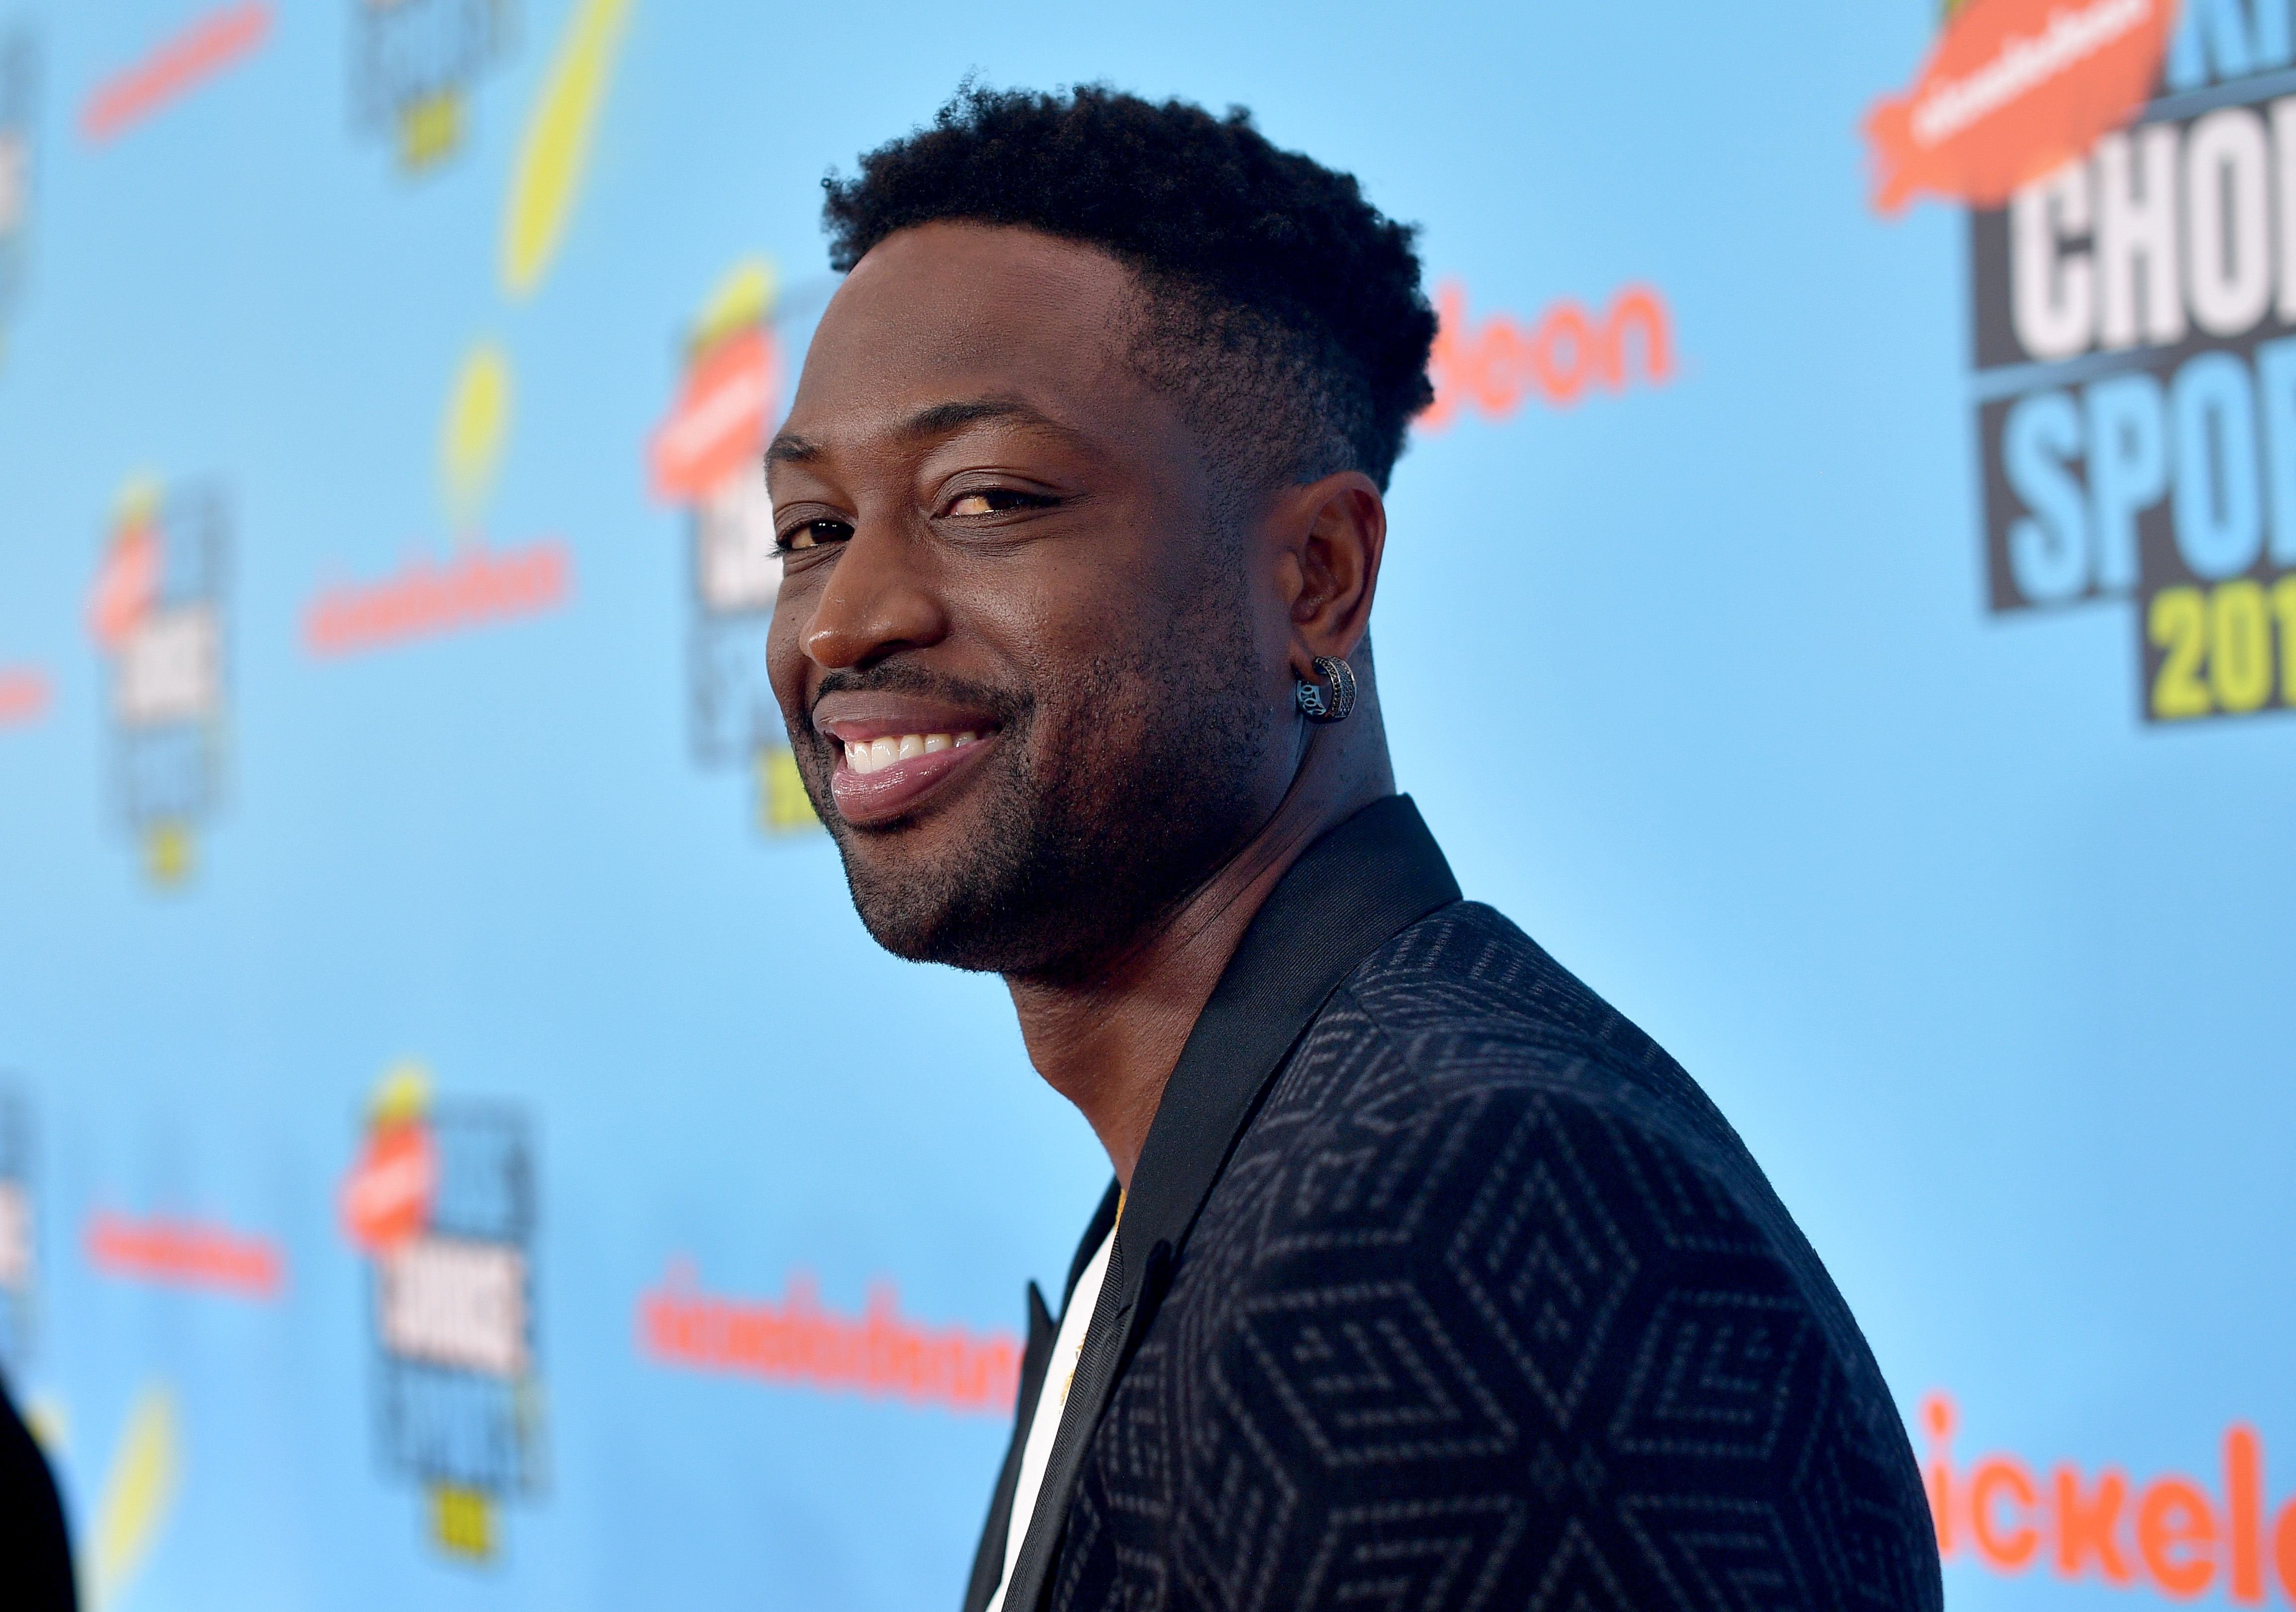 Dwyane Wade during the Nickelodeon Kids' Choice Sports 2019 at Barker Hangar on July 11, 2019 in Santa Monica, California. | Source: Getty Images